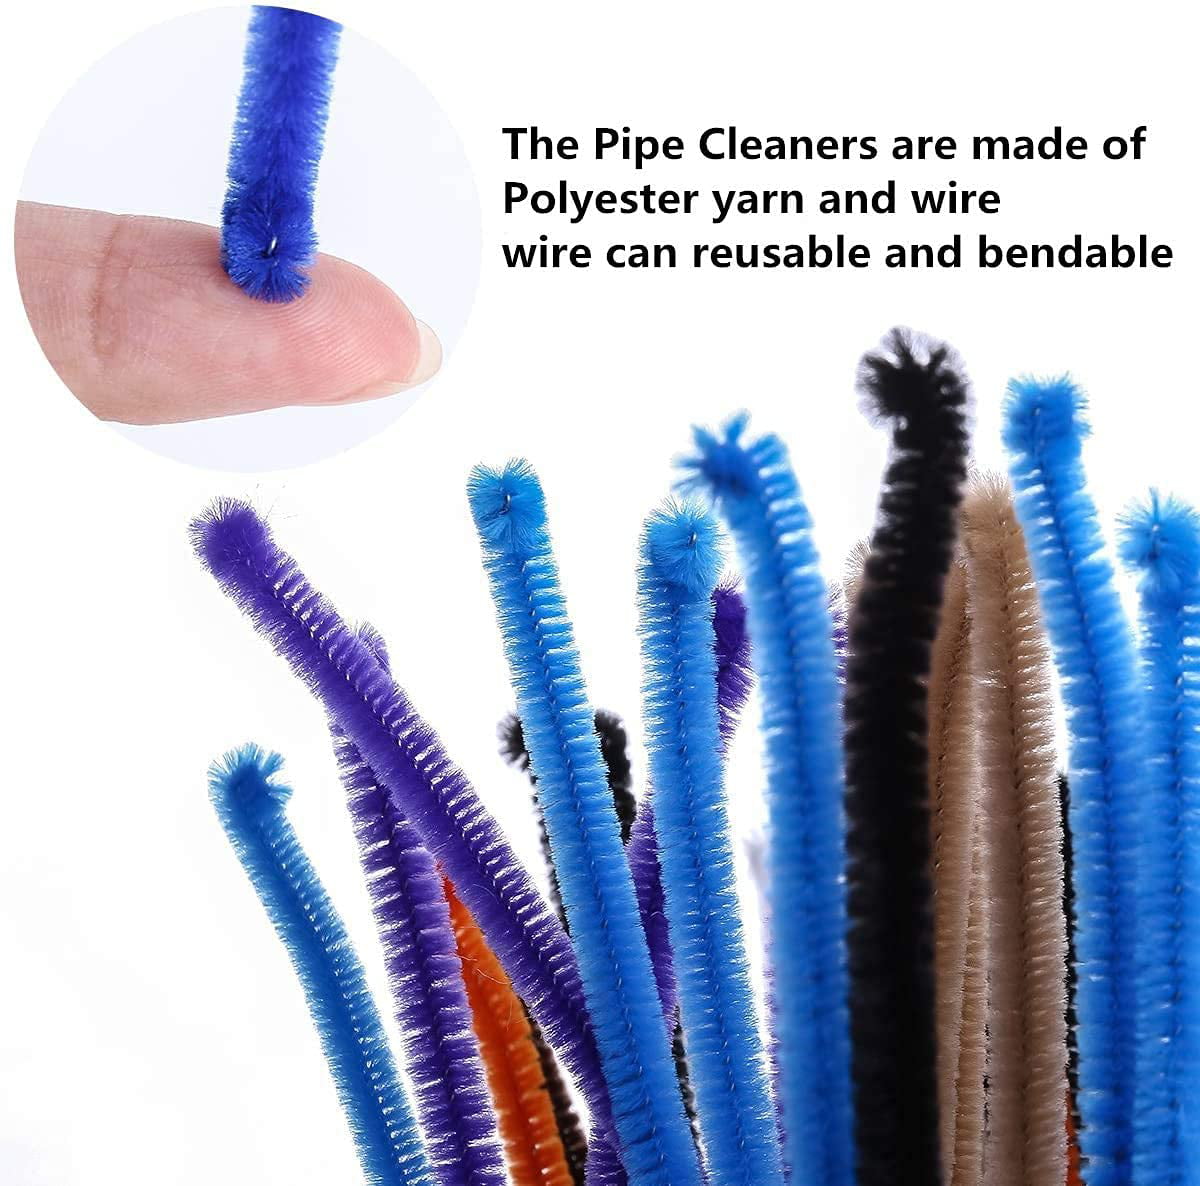 Black 100 Pipe Cleaners For Craft 12 Inches at Rs 99.00, Pipe Cleaning  Brushes